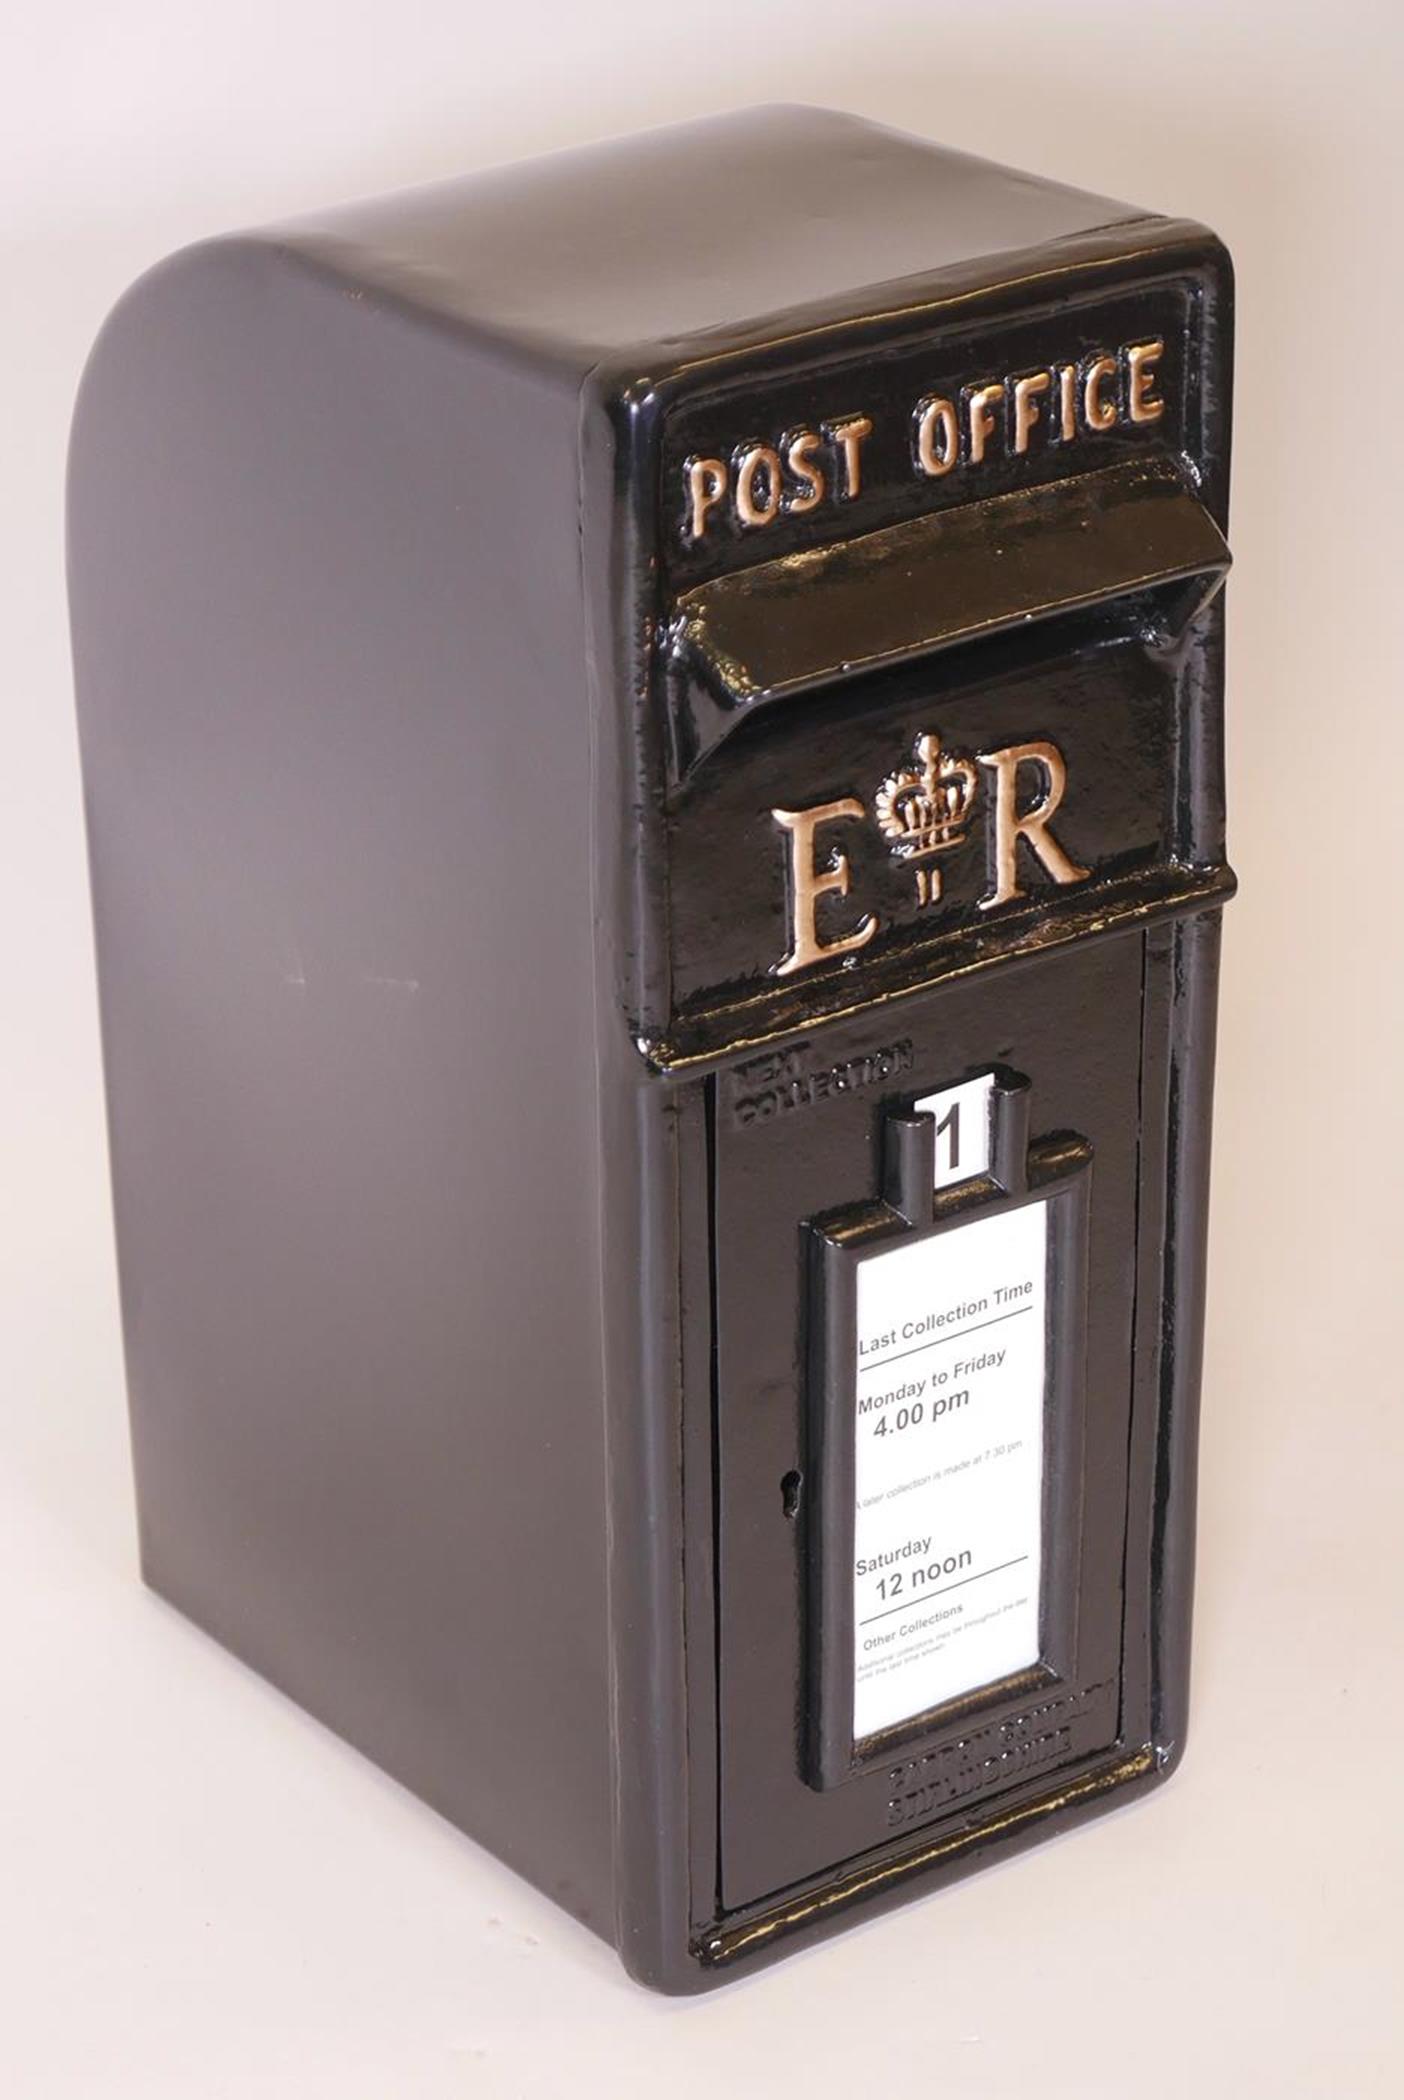 A black metal post box with cast iron front and metal shell, 23" high